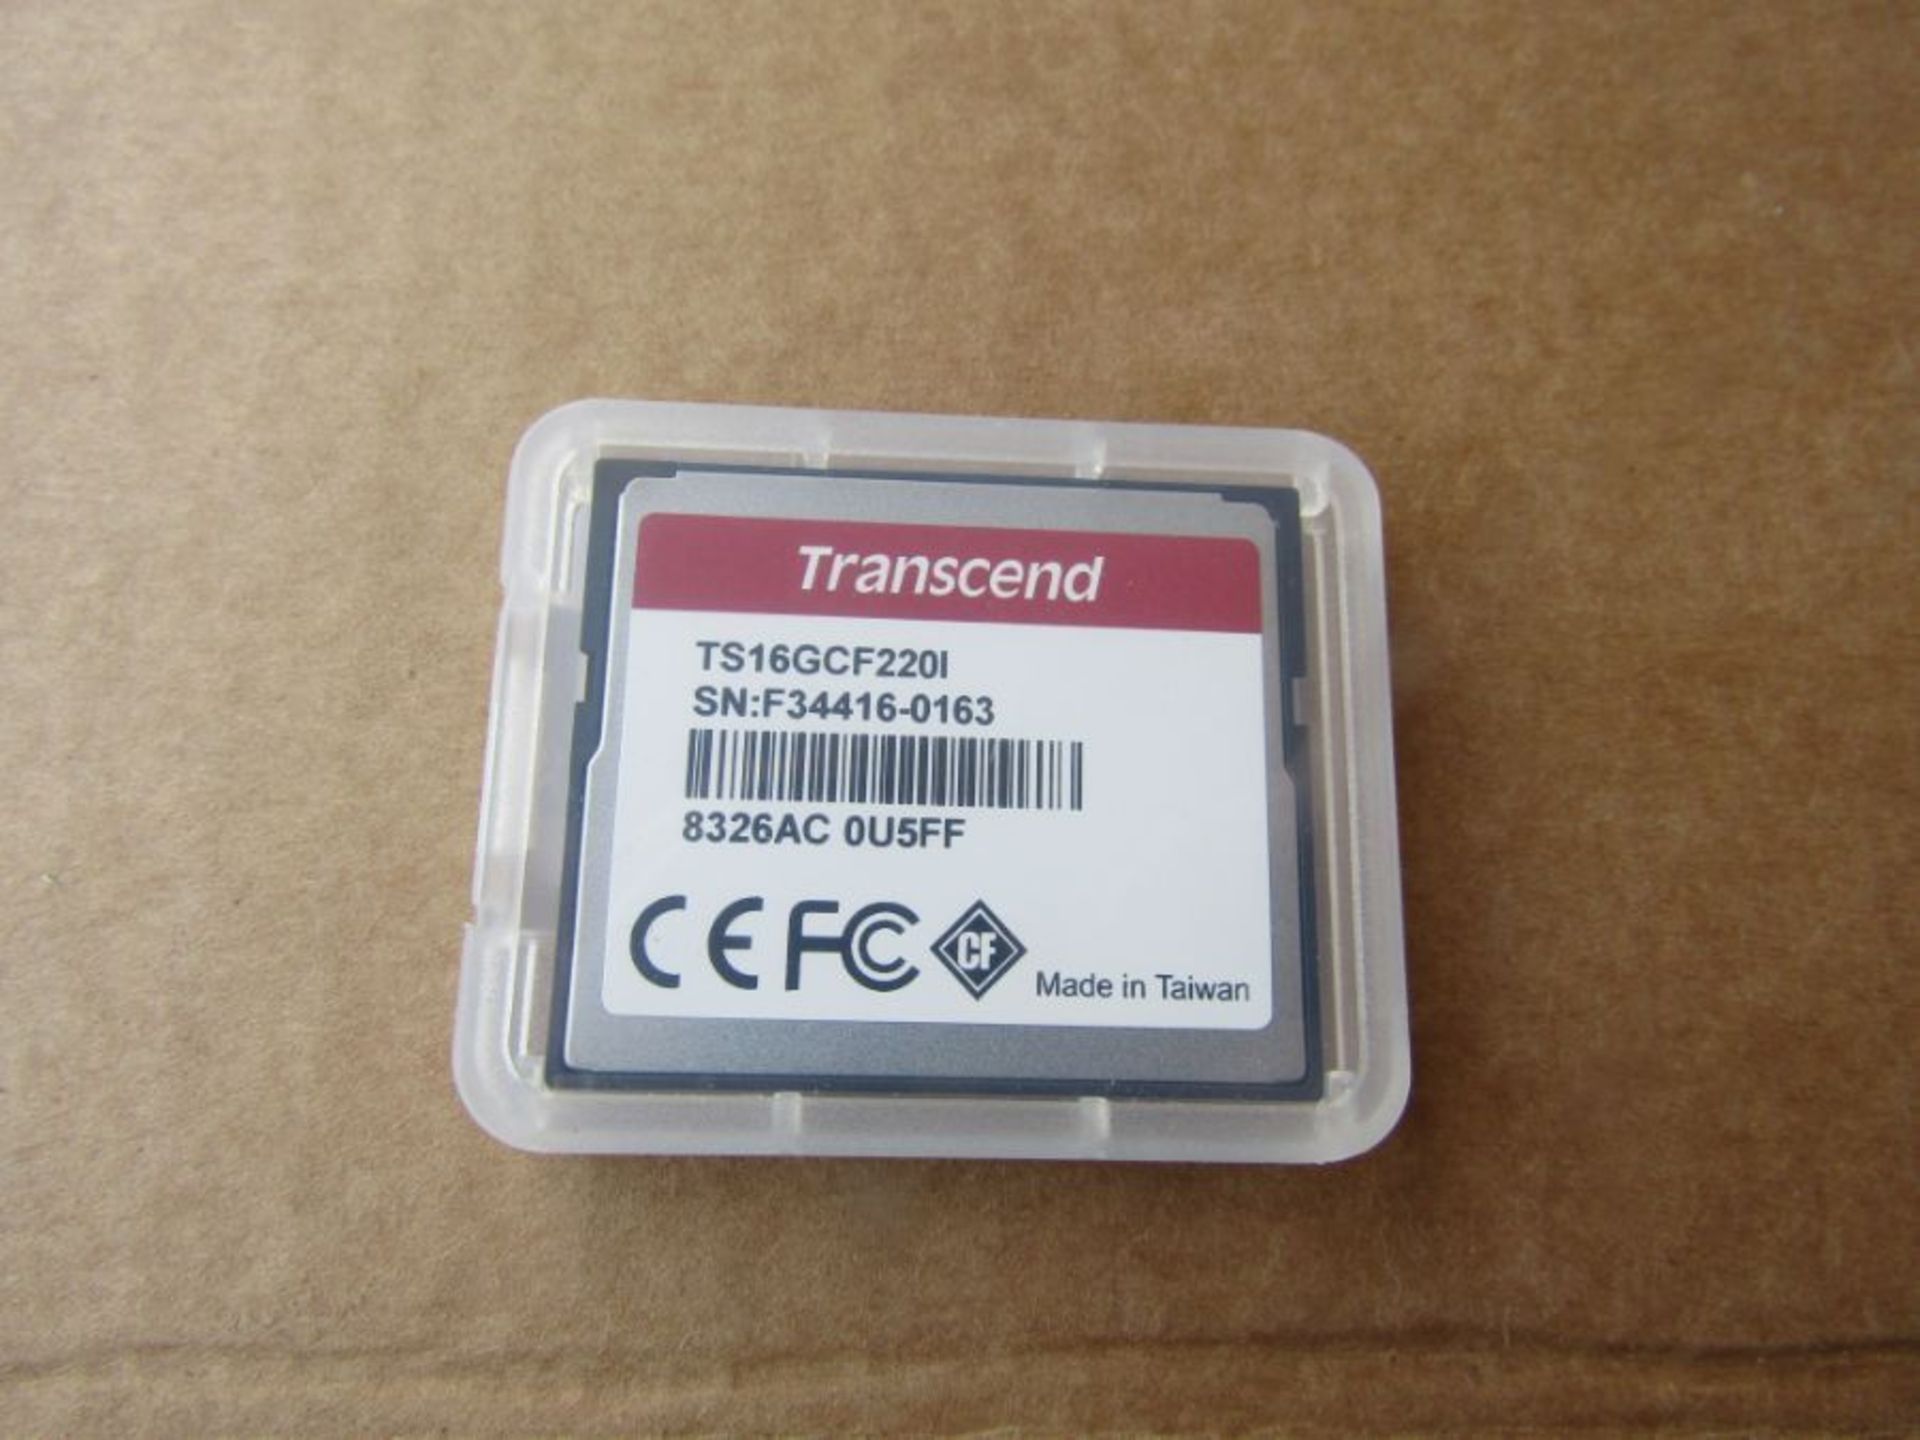 Transcend CF220I CompactFlash Industrial 16 GB SLC Compact Flash Card IT 1249679 - Image 3 of 4